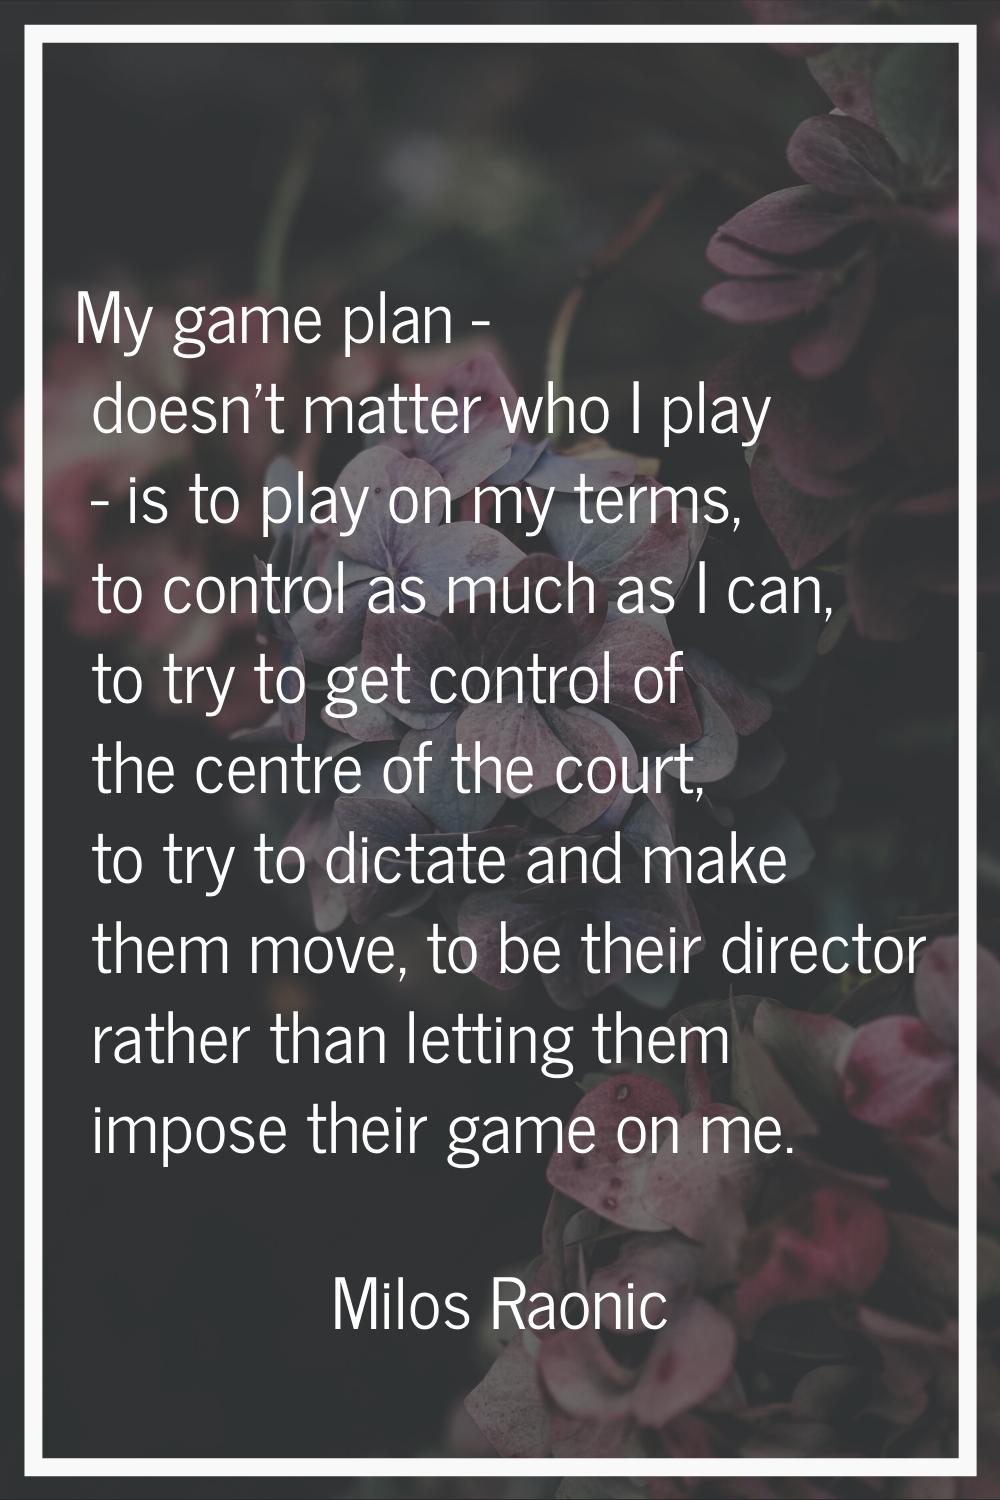 My game plan - doesn't matter who I play - is to play on my terms, to control as much as I can, to 